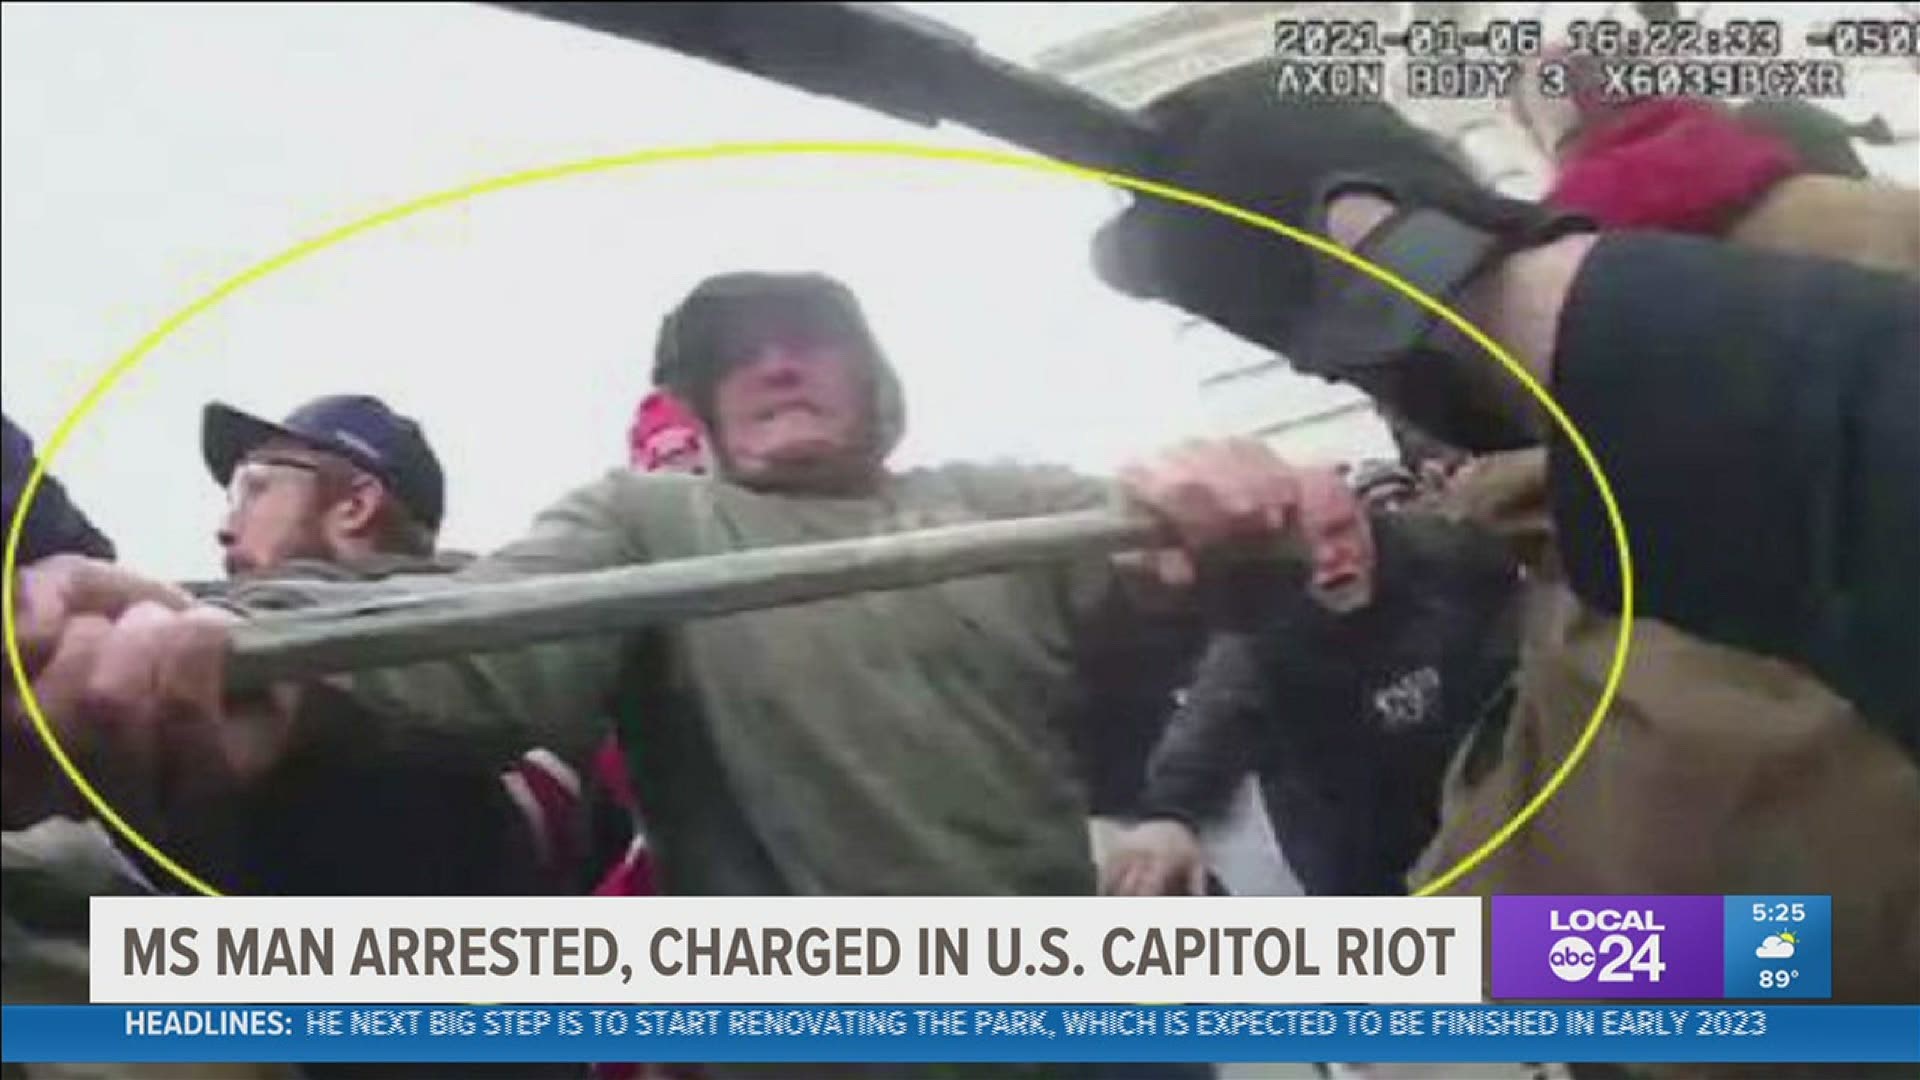 Local 24 News political analyst and commentator Otis Sanford shares his point of view on the latest arrest in the January 6th Capitol riot.